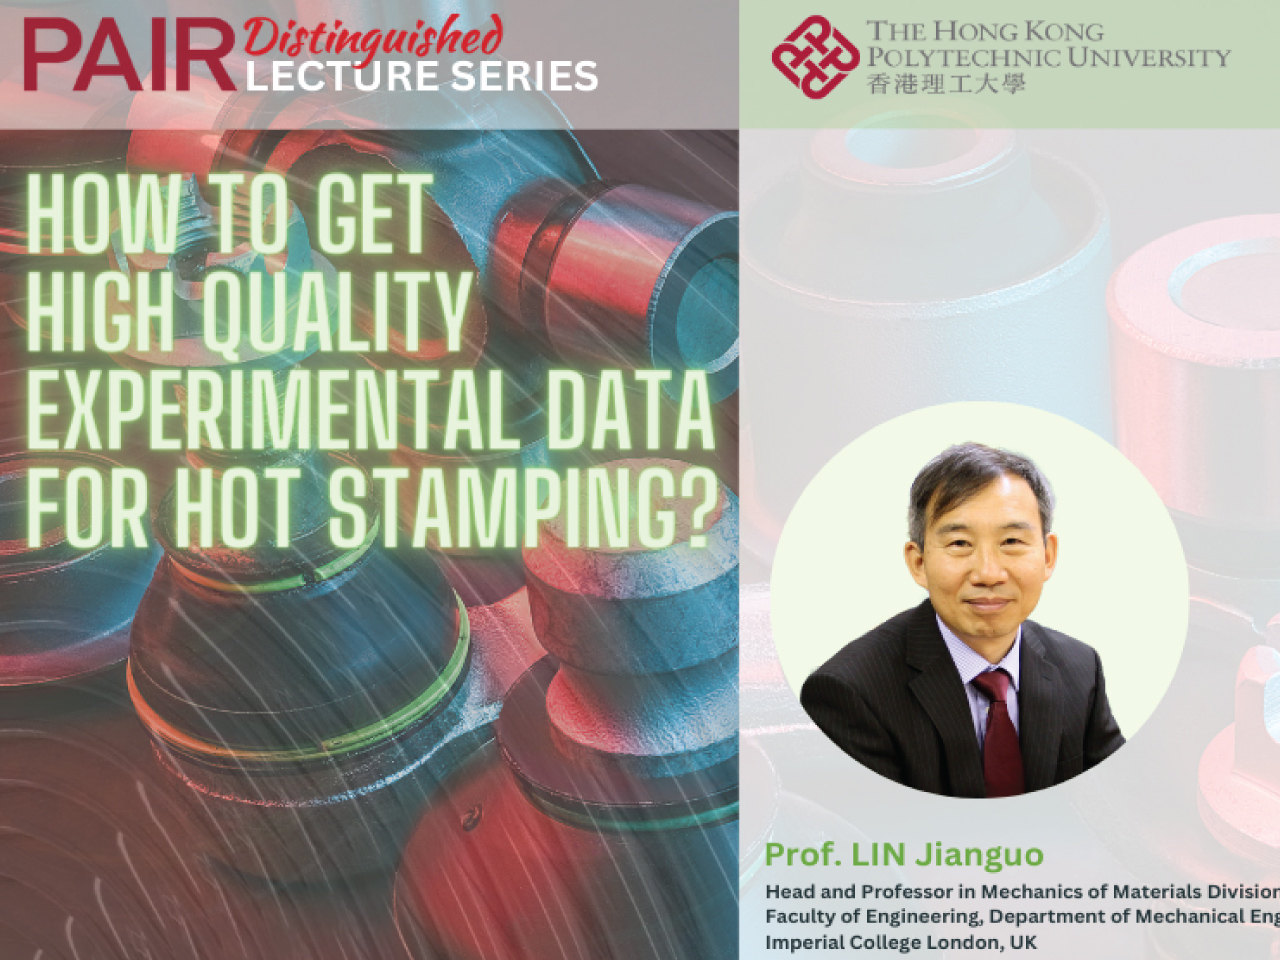 link to PAIR distinguished lecture series :  how to get high quality experimental data for hot stamping?